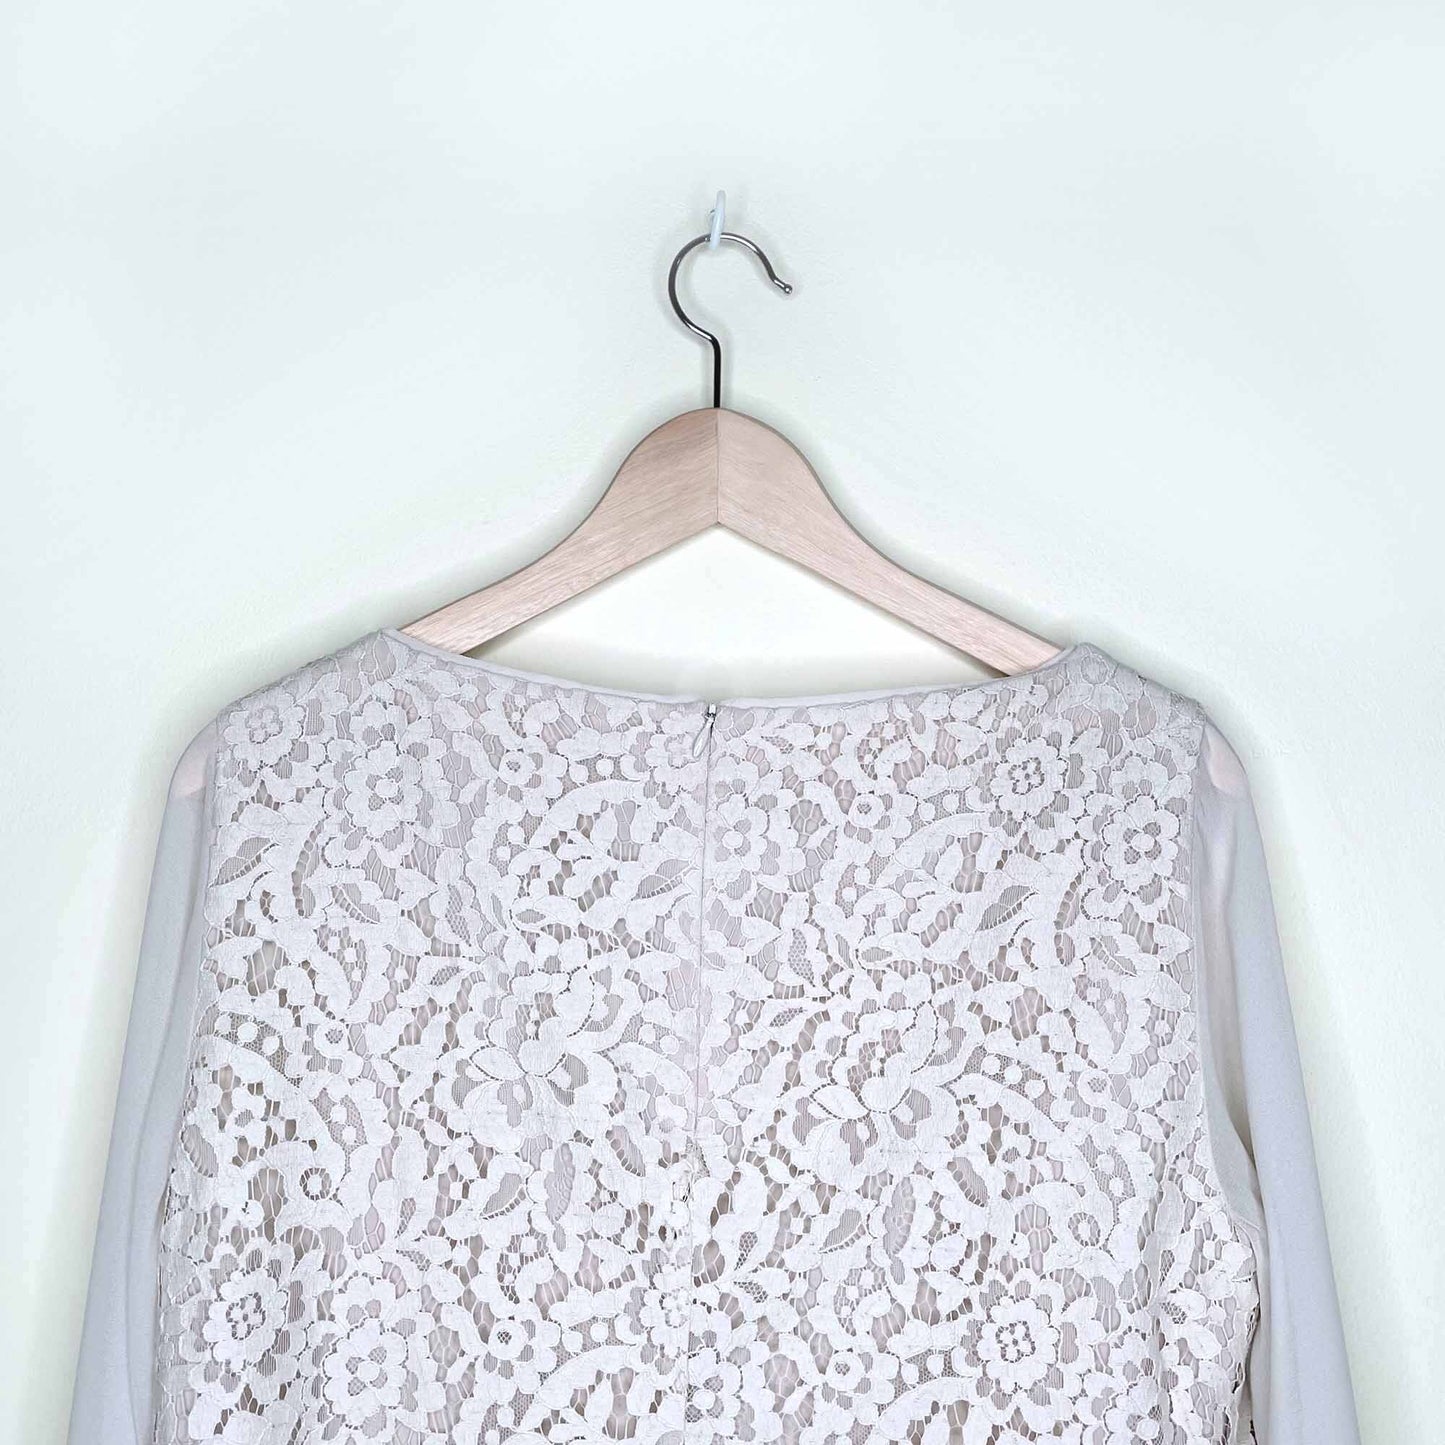 nwt ann taylor lace blouse with sheer sleeves - size 4